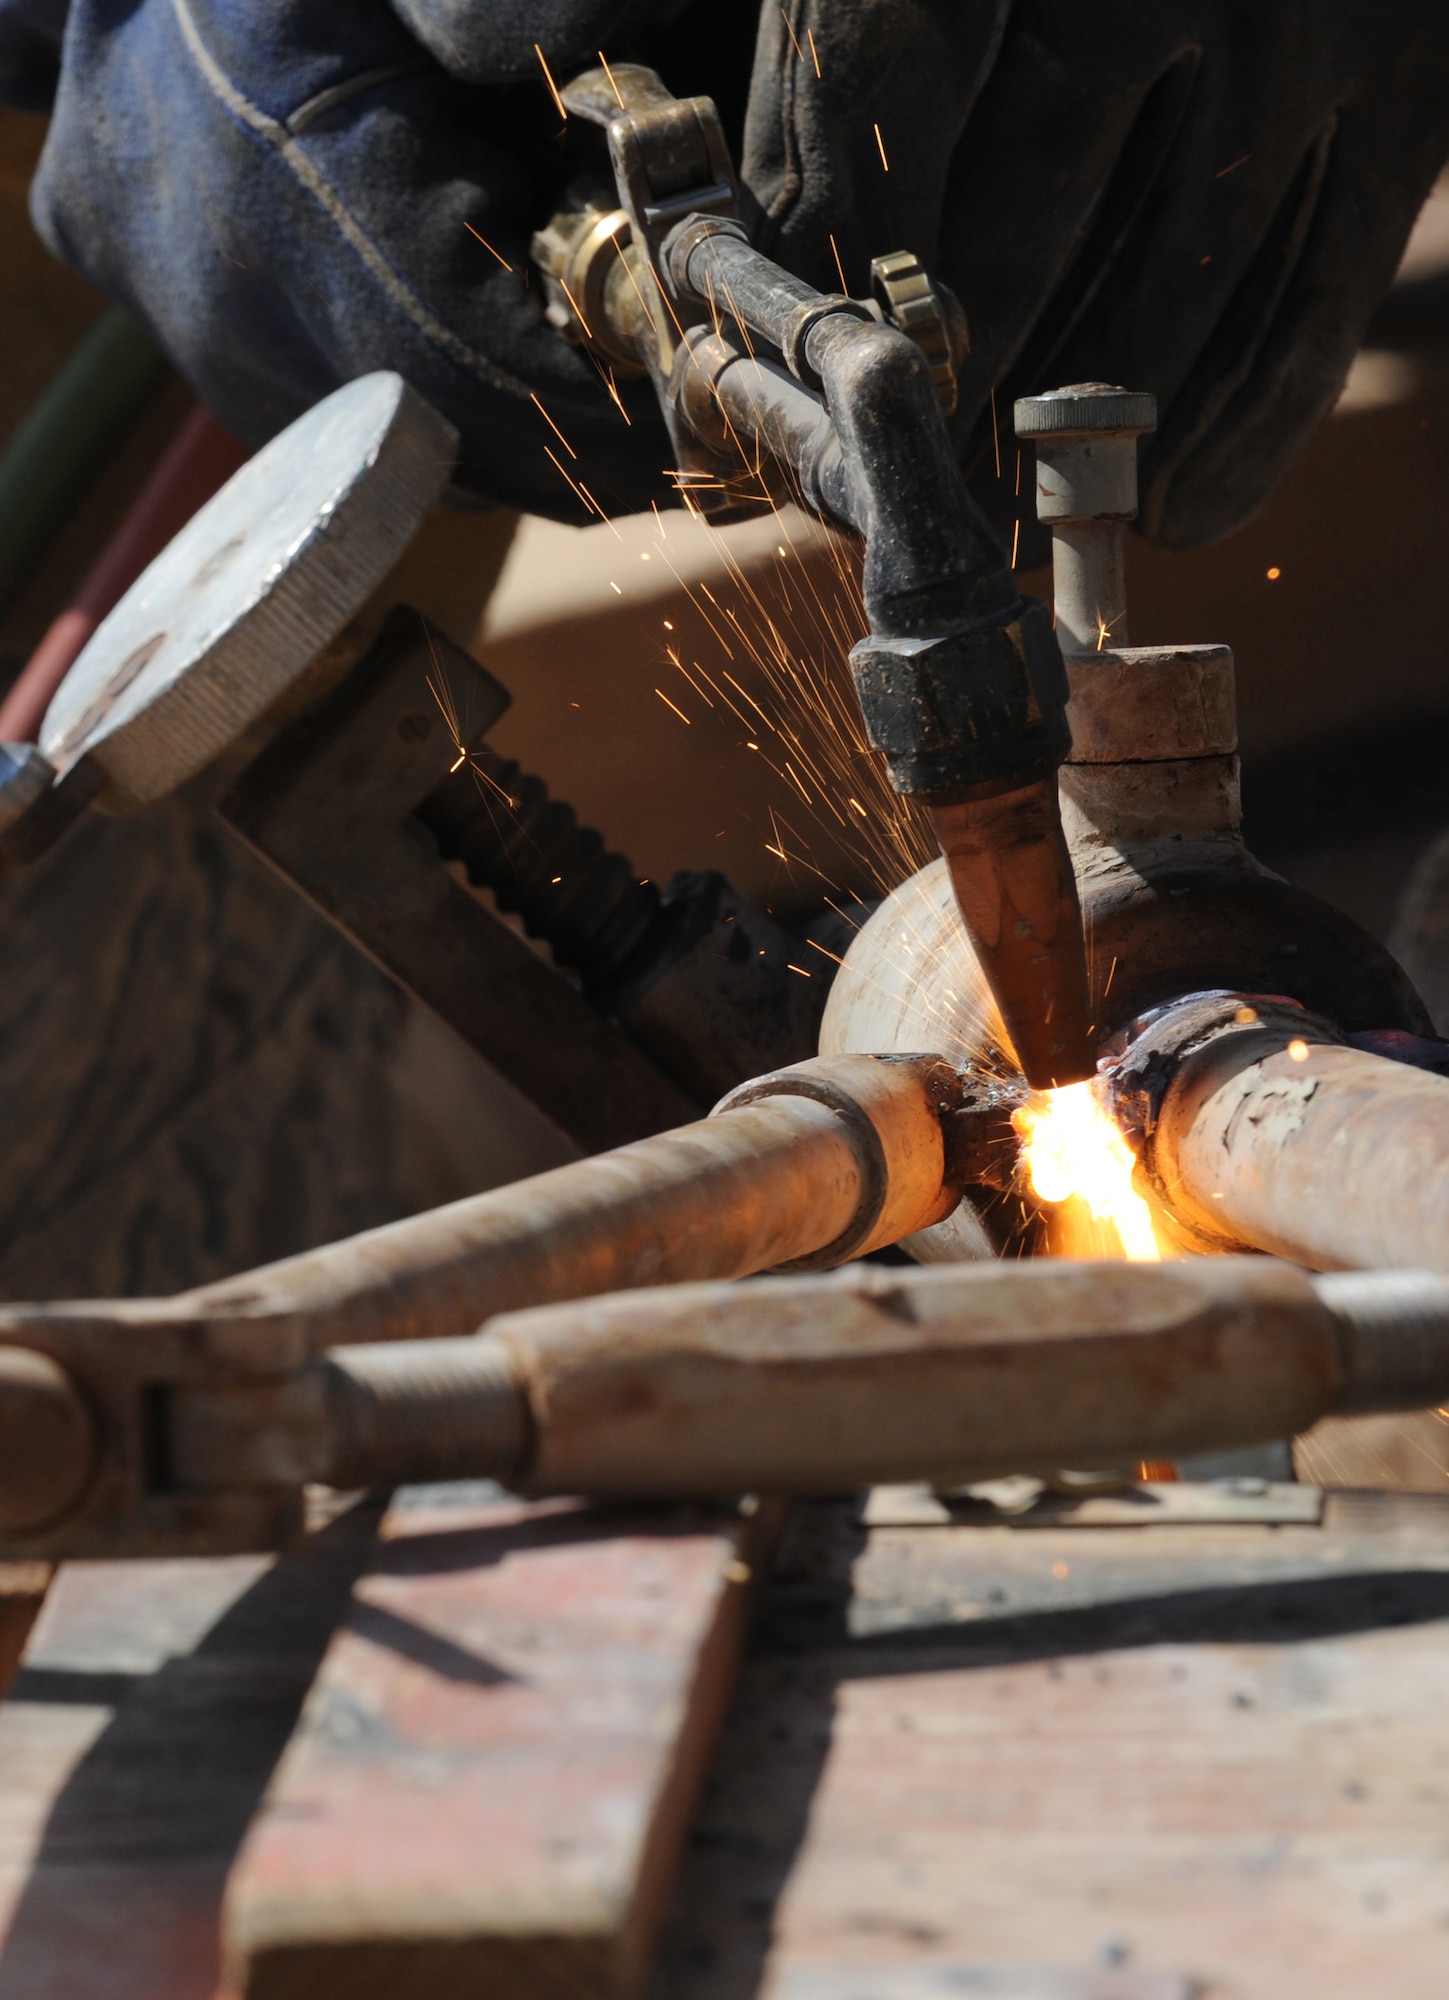 Tech. Sgt. Roy Hurd uses an oxy-acetylene torch to cut up enemy weapons at Joint Base Balad, Iraq, March 18. The weapons were turned in by units and are being destroyed so they cannot be used against coalition forces or Iraqis. Sergeant Hurd is a 332nd Expeditionary Civil Engineer Squadron structural journeyman. (U.S. Air Force photo/Senior Airman Elizabeth Rissmiller)